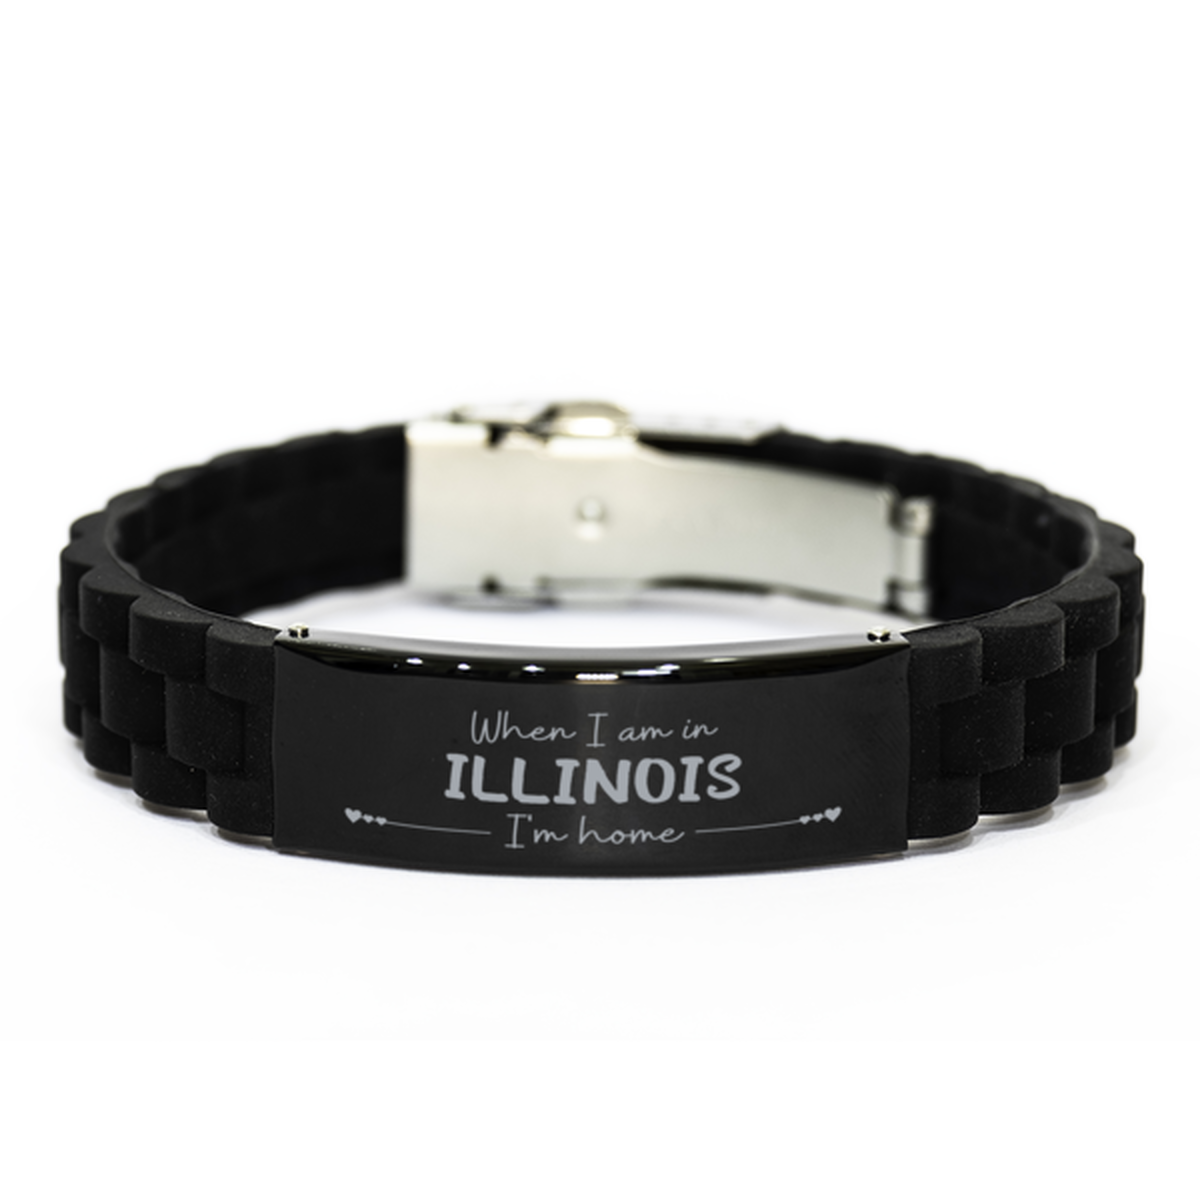 When I am in Illinois I'm home Black Glidelock Clasp Bracelet, Cheap Gifts For Illinois, State Illinois Birthday Gifts for Friends Coworker